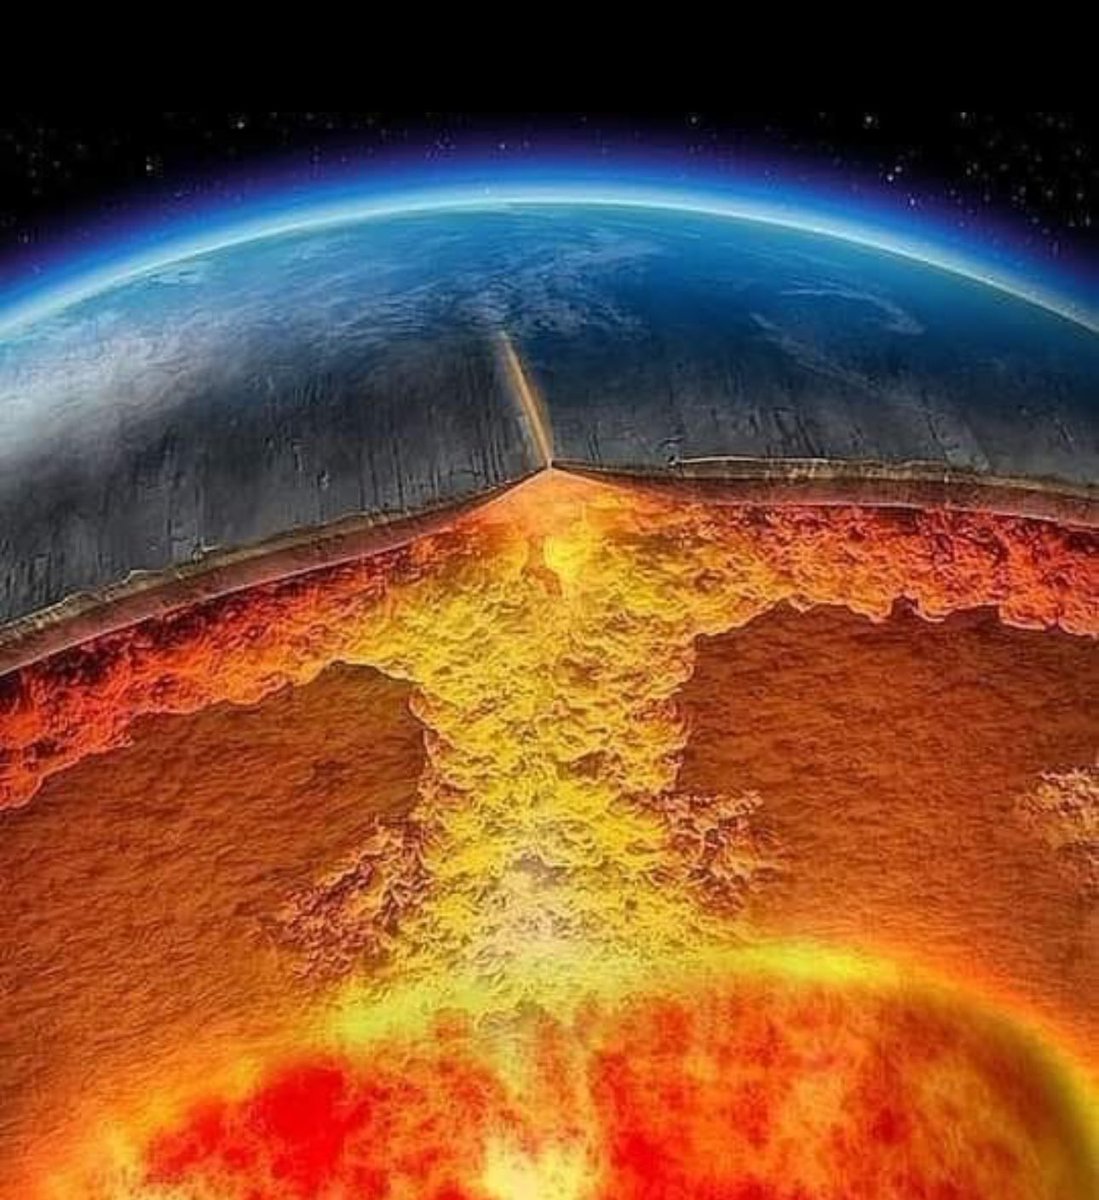 The Earth's core is as hot as the surface of the Sun. The Earth’s heat can power our world millions of times over through thermal engines like a Stirling Engine. The Earth is composed of molten metals and reaches temperatures of about 6,000 °C the Sun's surface is 5,500°C.